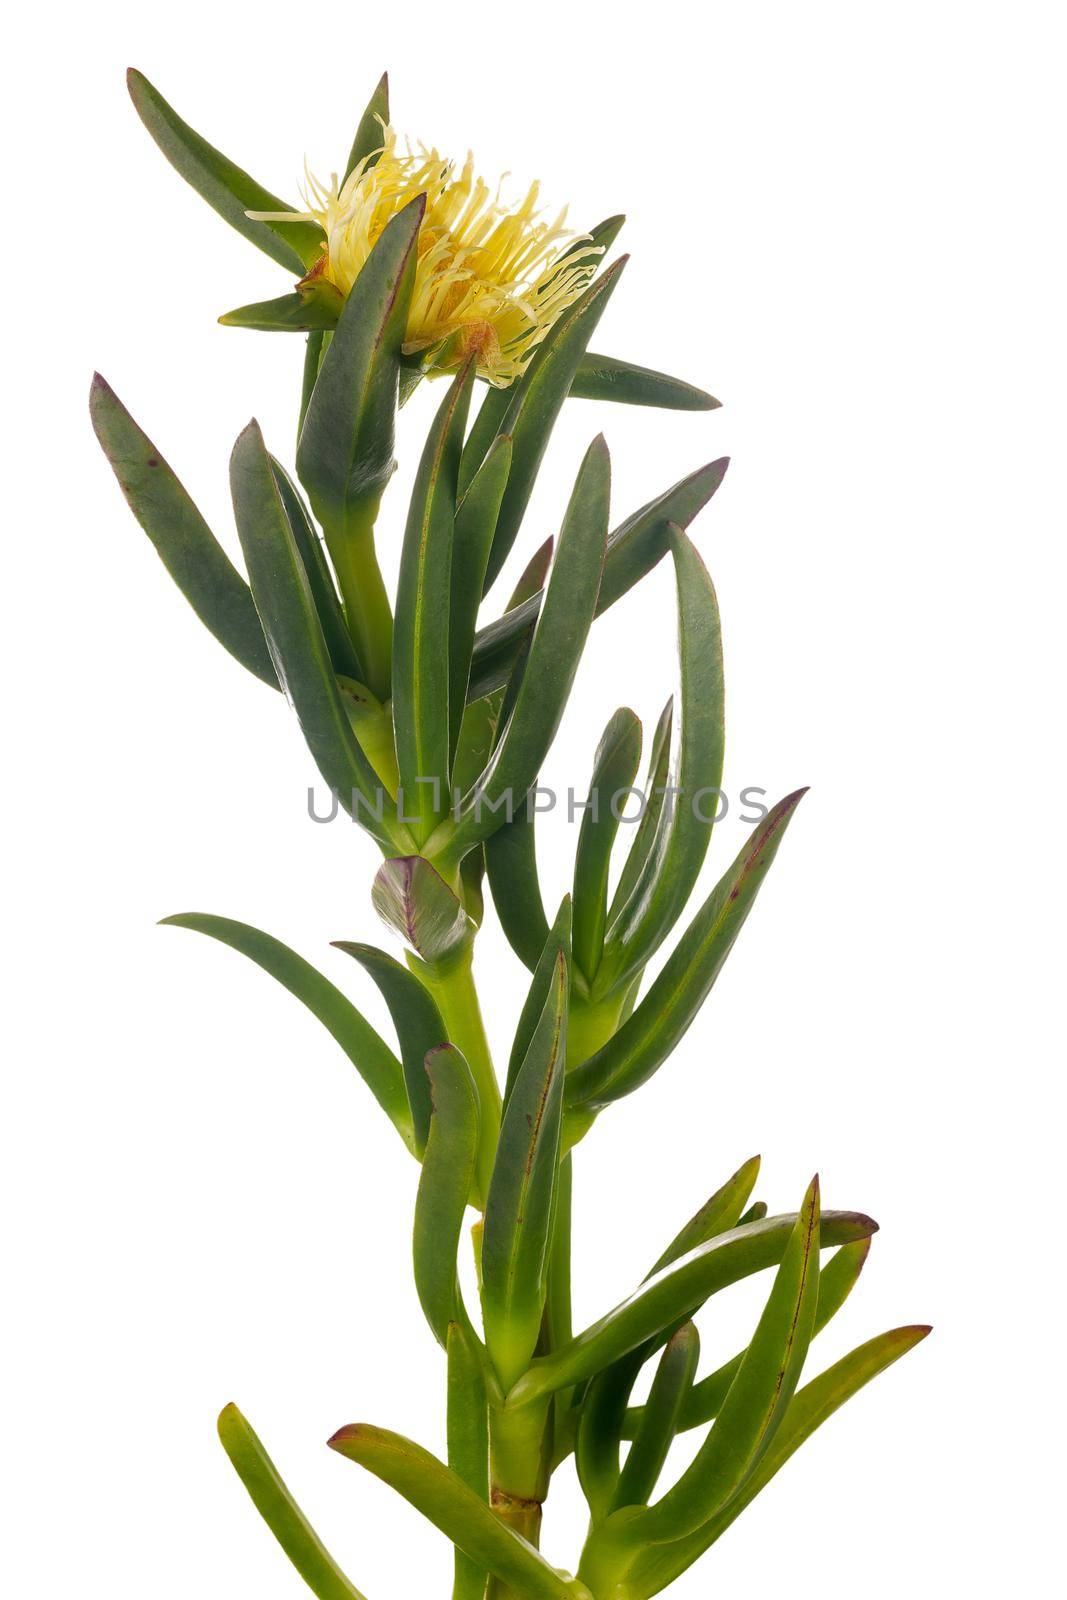 Carpobrotus edulis is a ground-creeper native to South Africa. Hottentot fig is also sometimes called the highway ice plant, the pigface, and the sour fig. Isolated on white background.